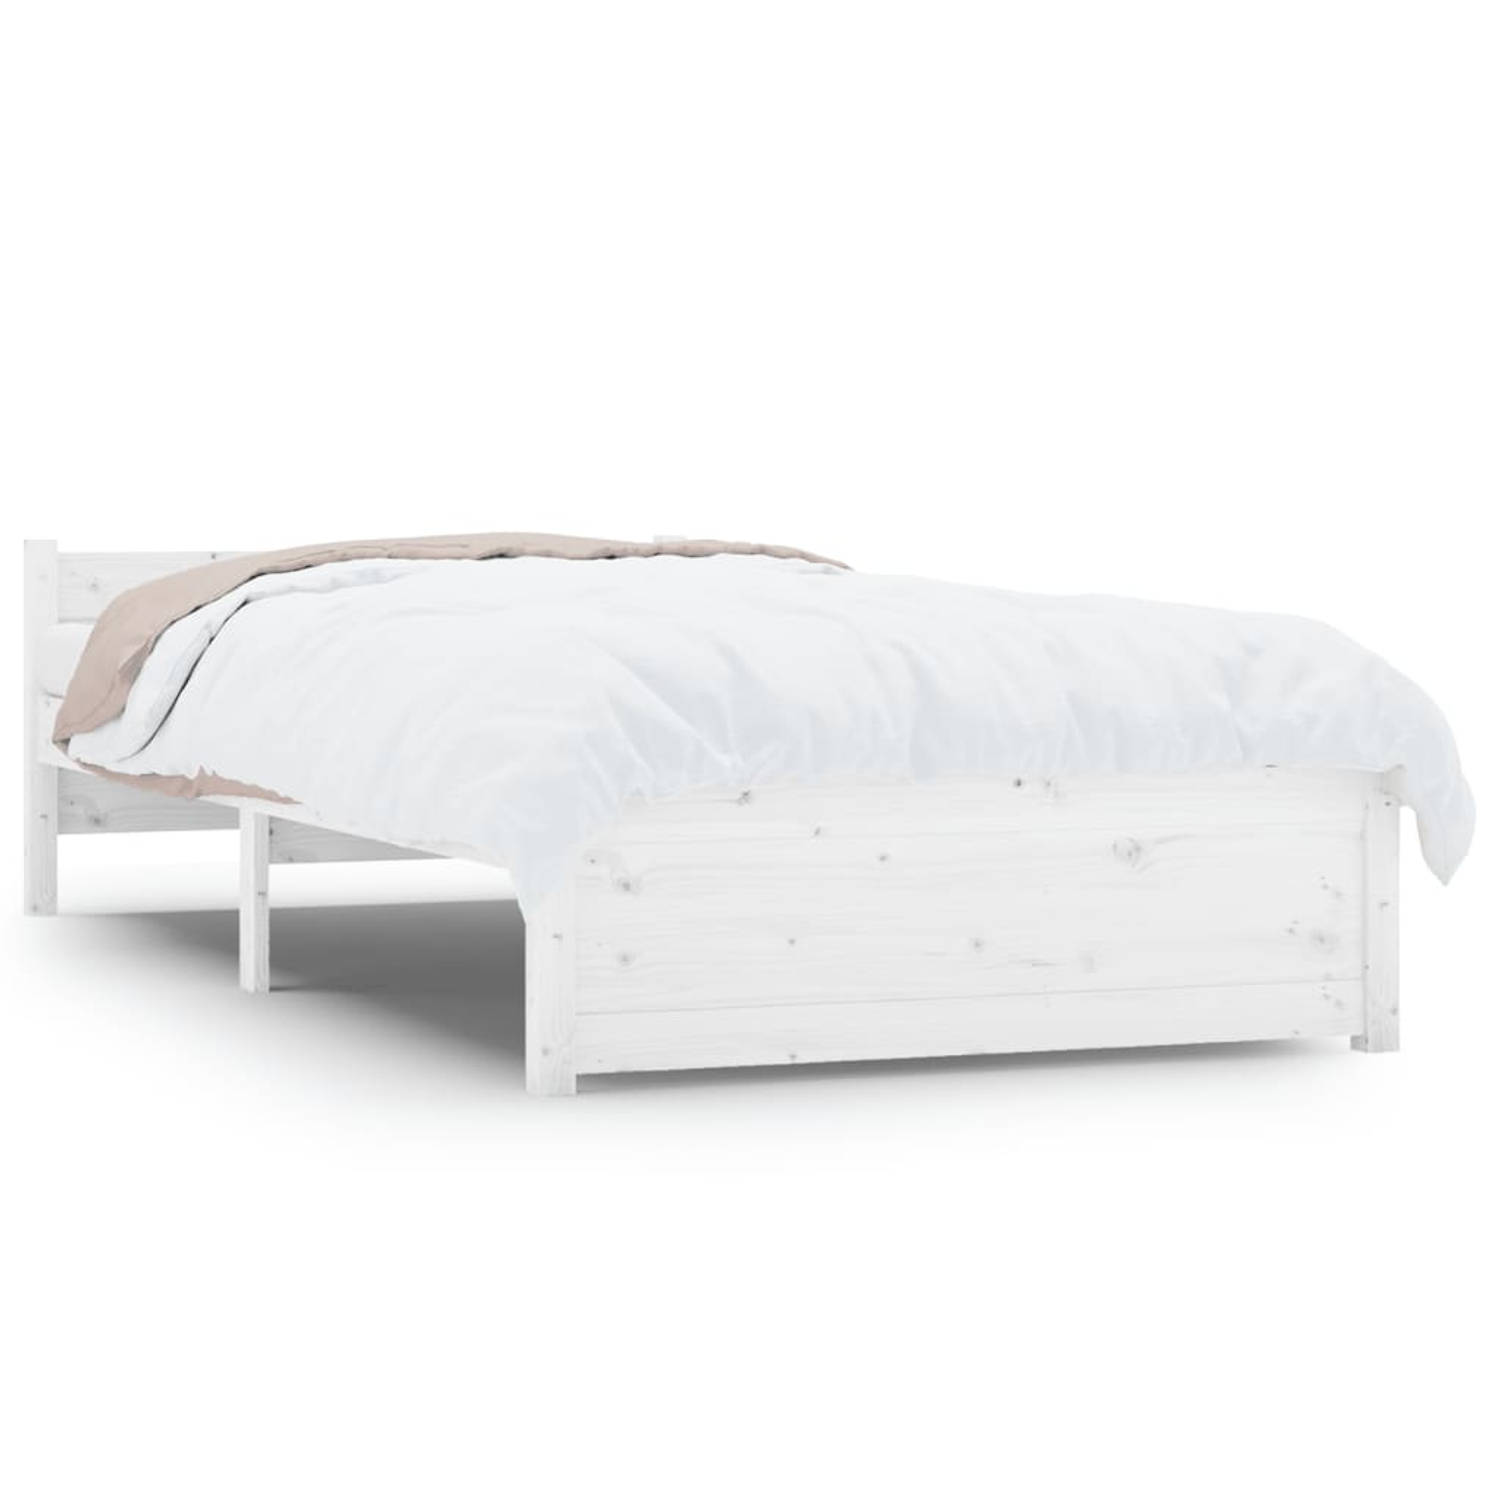 The Living Store Bedframe massief hout wit 100x200 cm - Bed